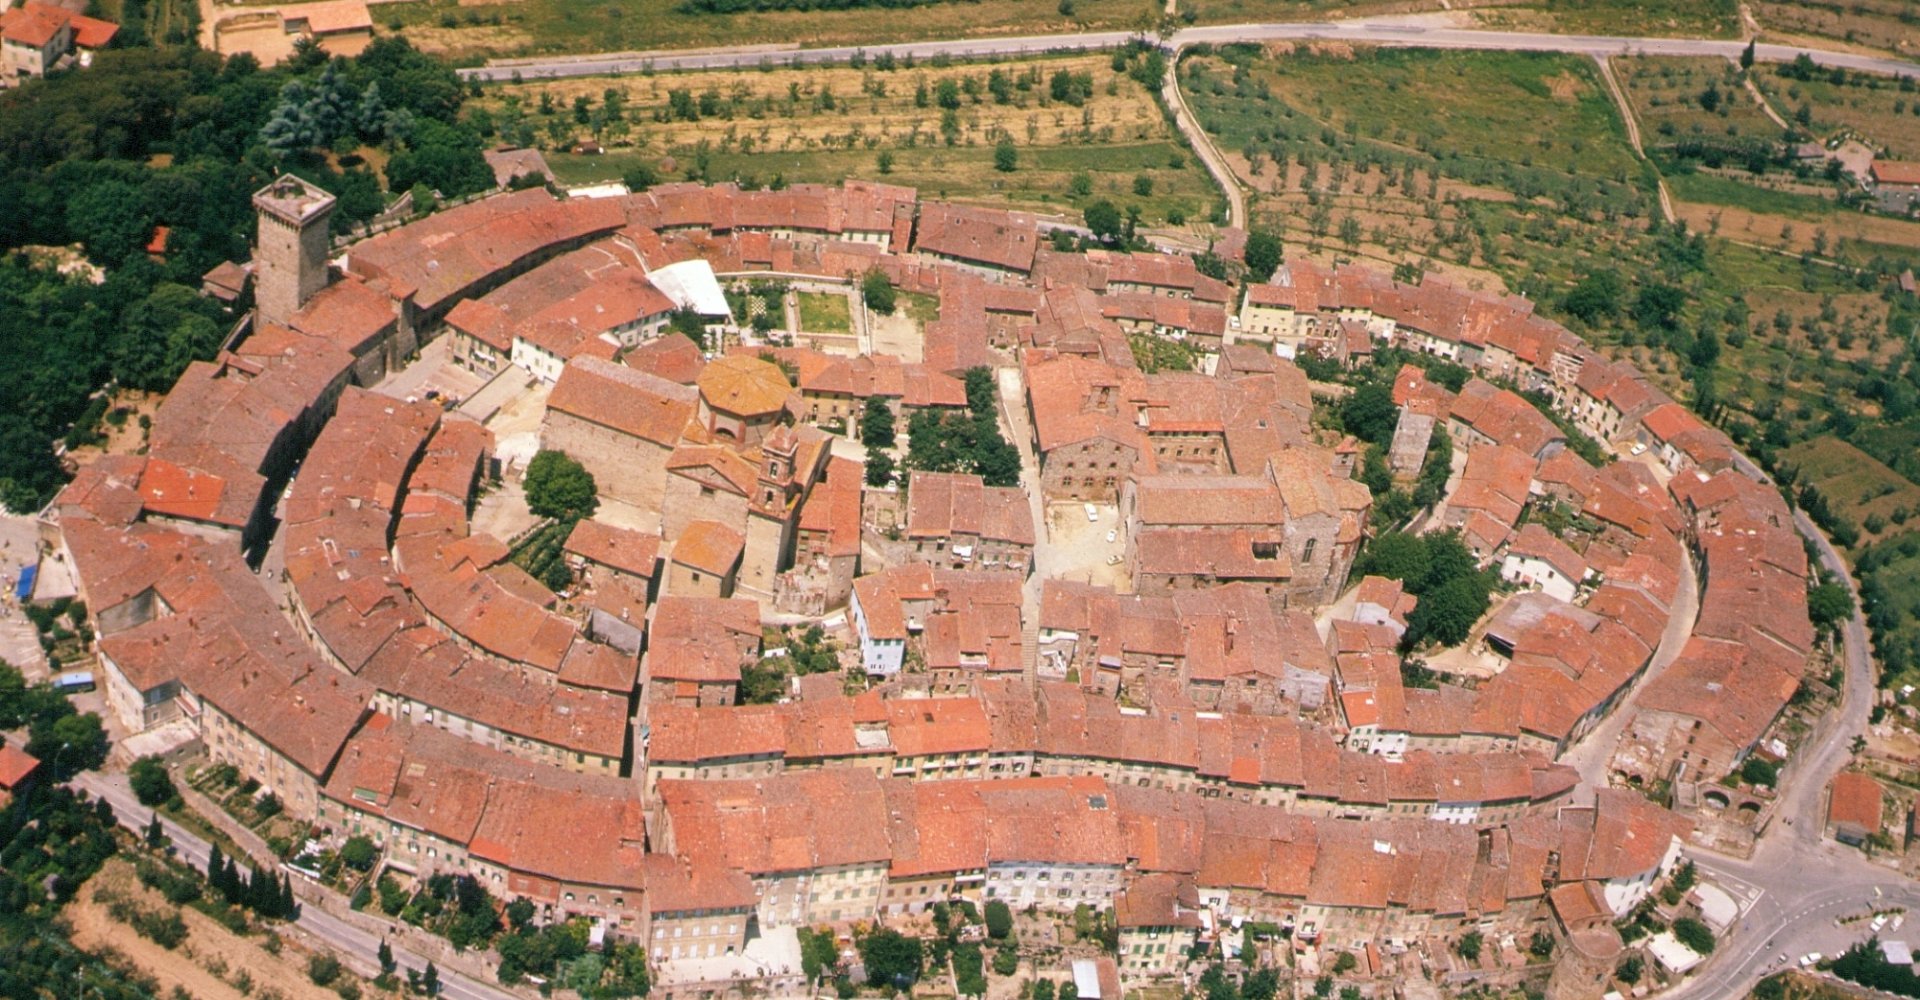 Lucignano from above